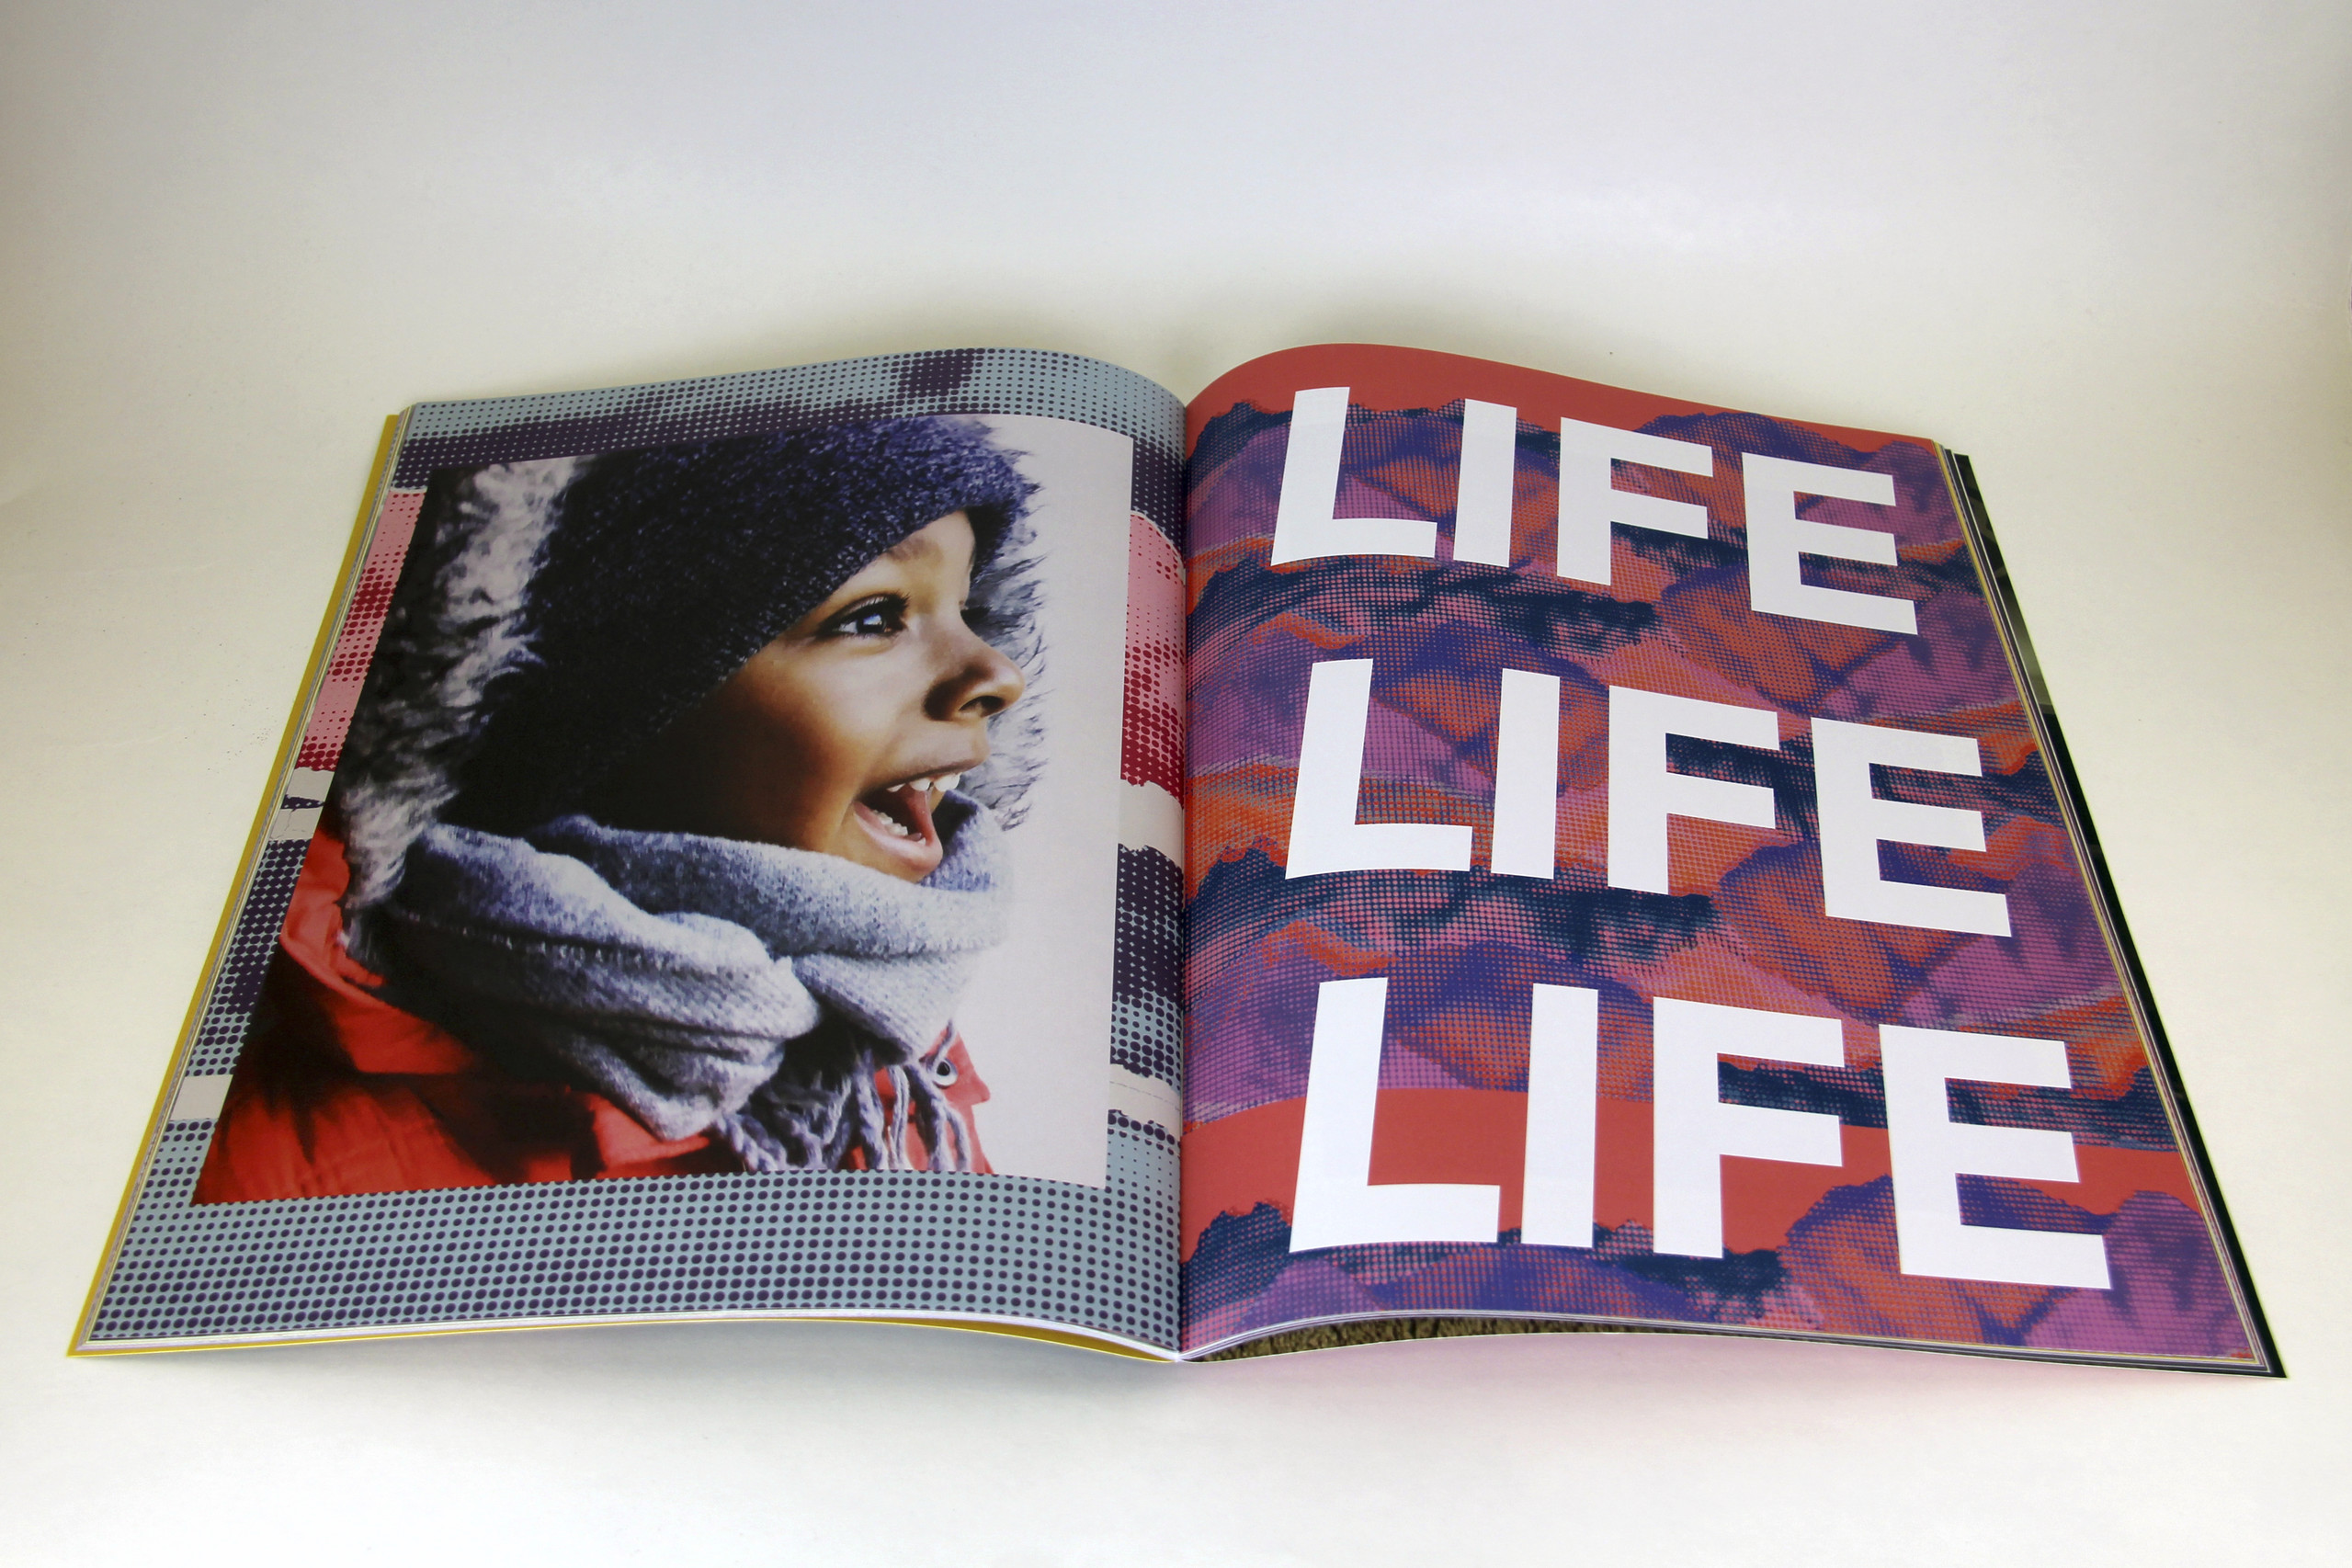 Open book features photograph of a child with medium-brown skin on the left side of the fold and the words "LIFE LIFE LIFE" filling the page on the right.